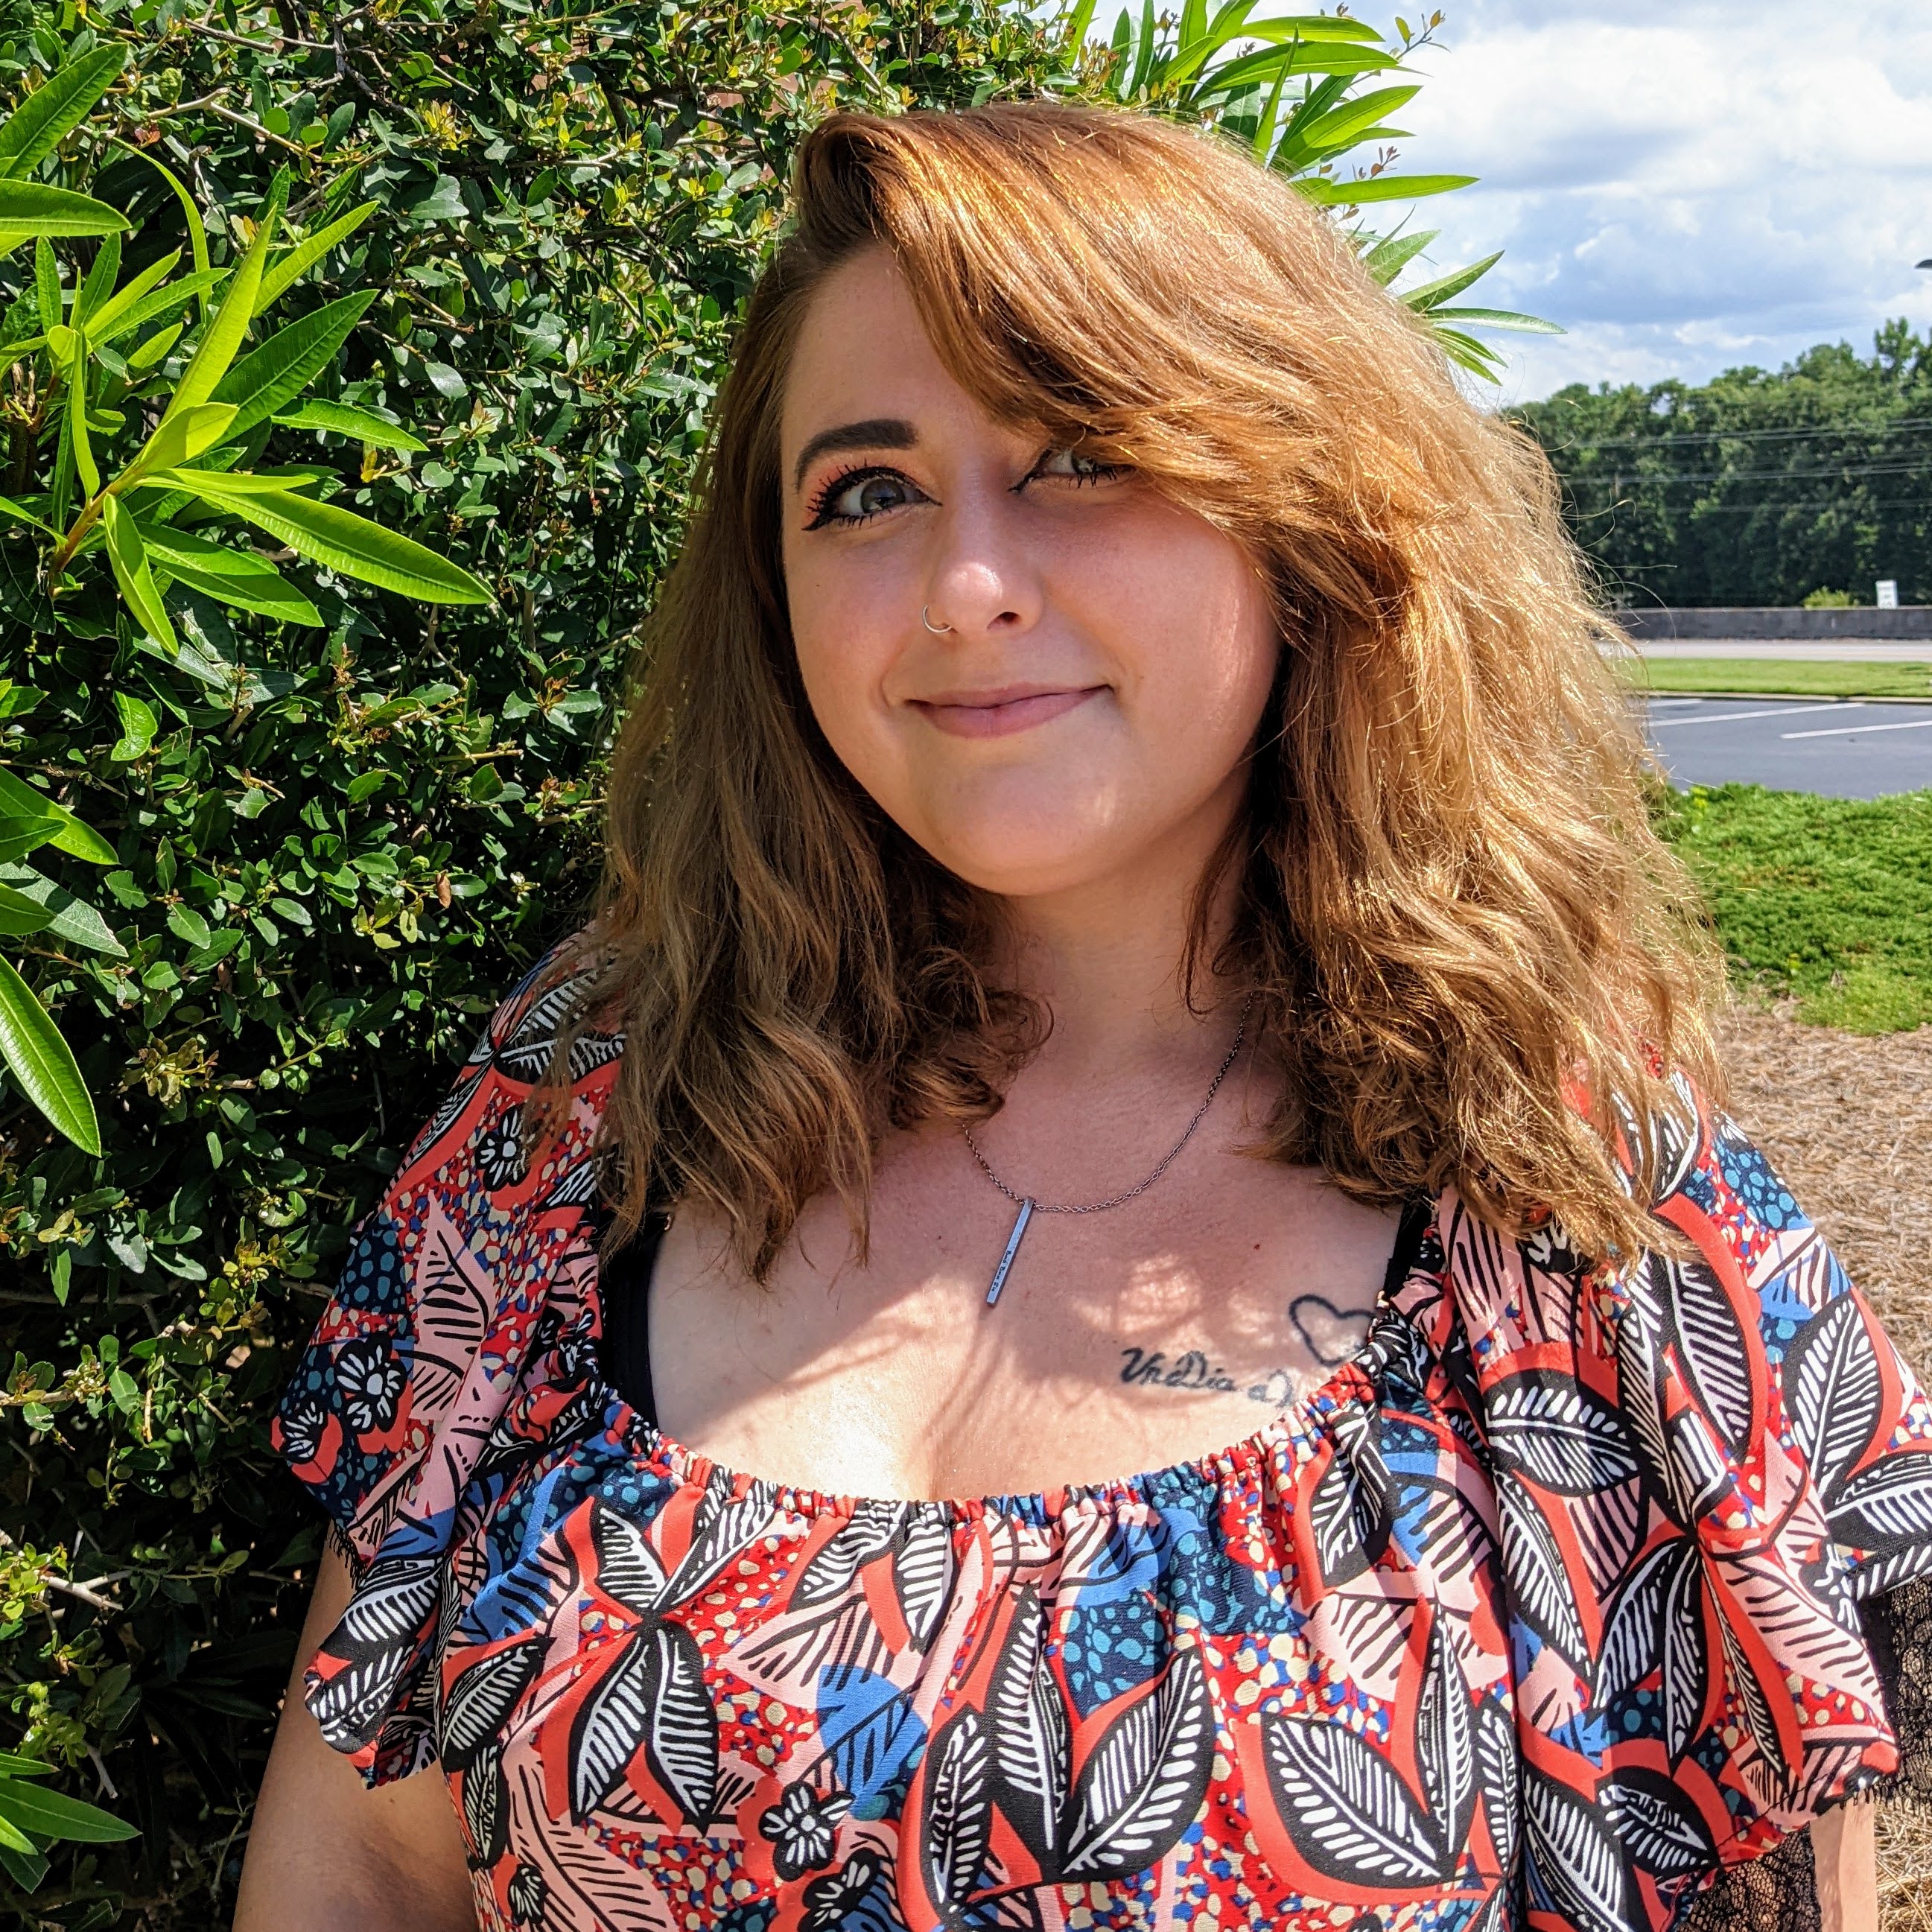 Savvy is a white woman with long brown hair with a red tint. She is wearing a floral blouse and smiling with a closed mouth while standing in front of greenery outside.